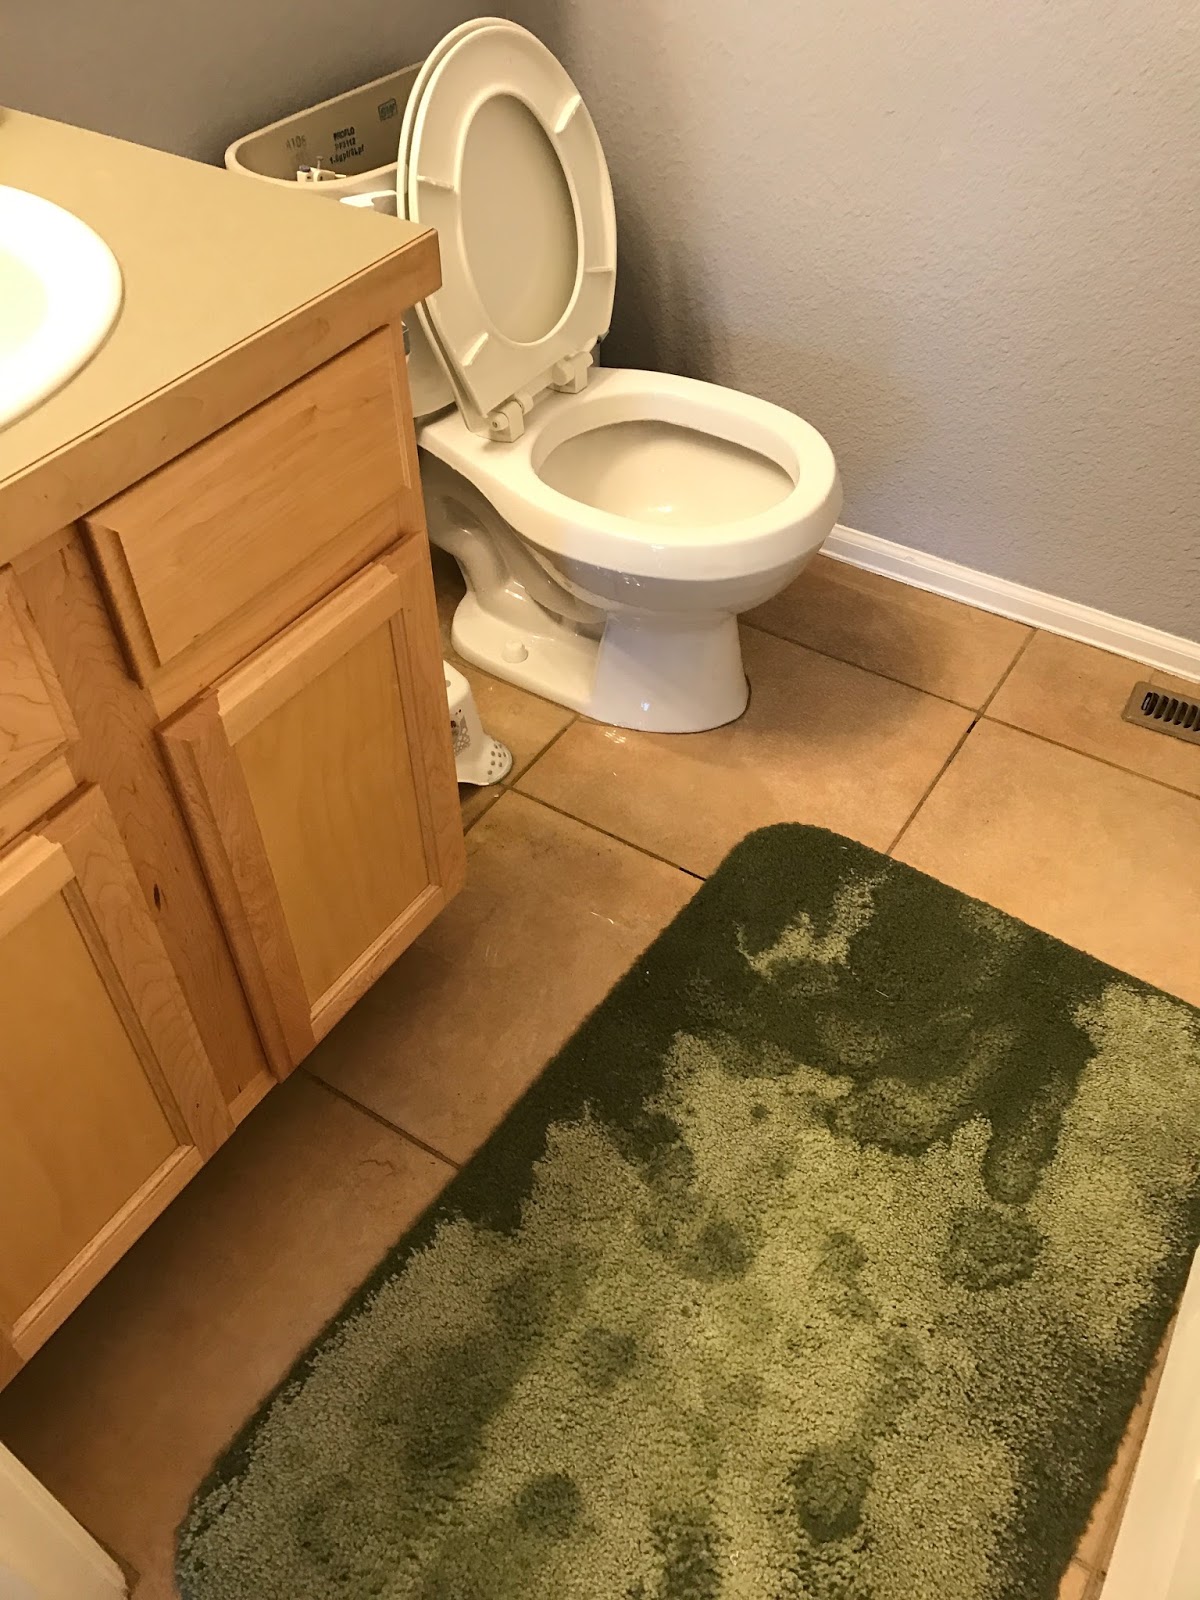 How to Repair and Prevent Bathroom Water Damage?